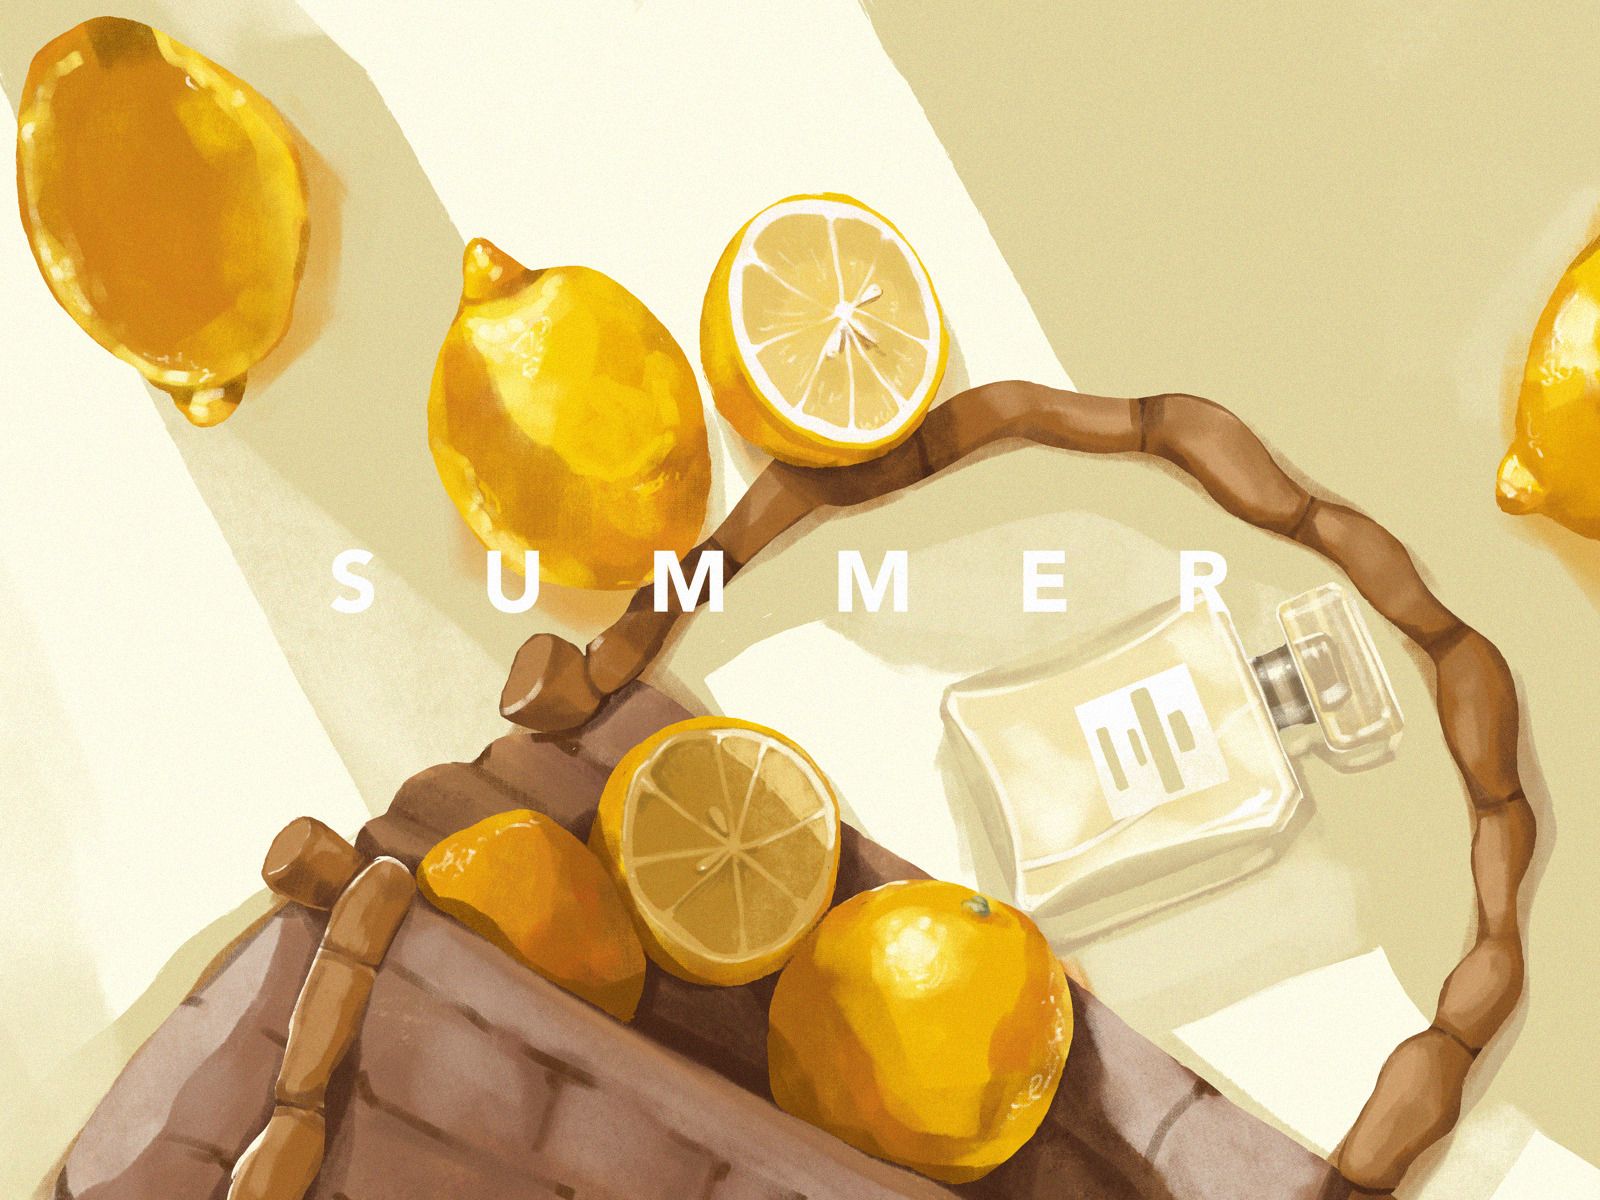 August Rush: Bright Collection of Summer Illustrations